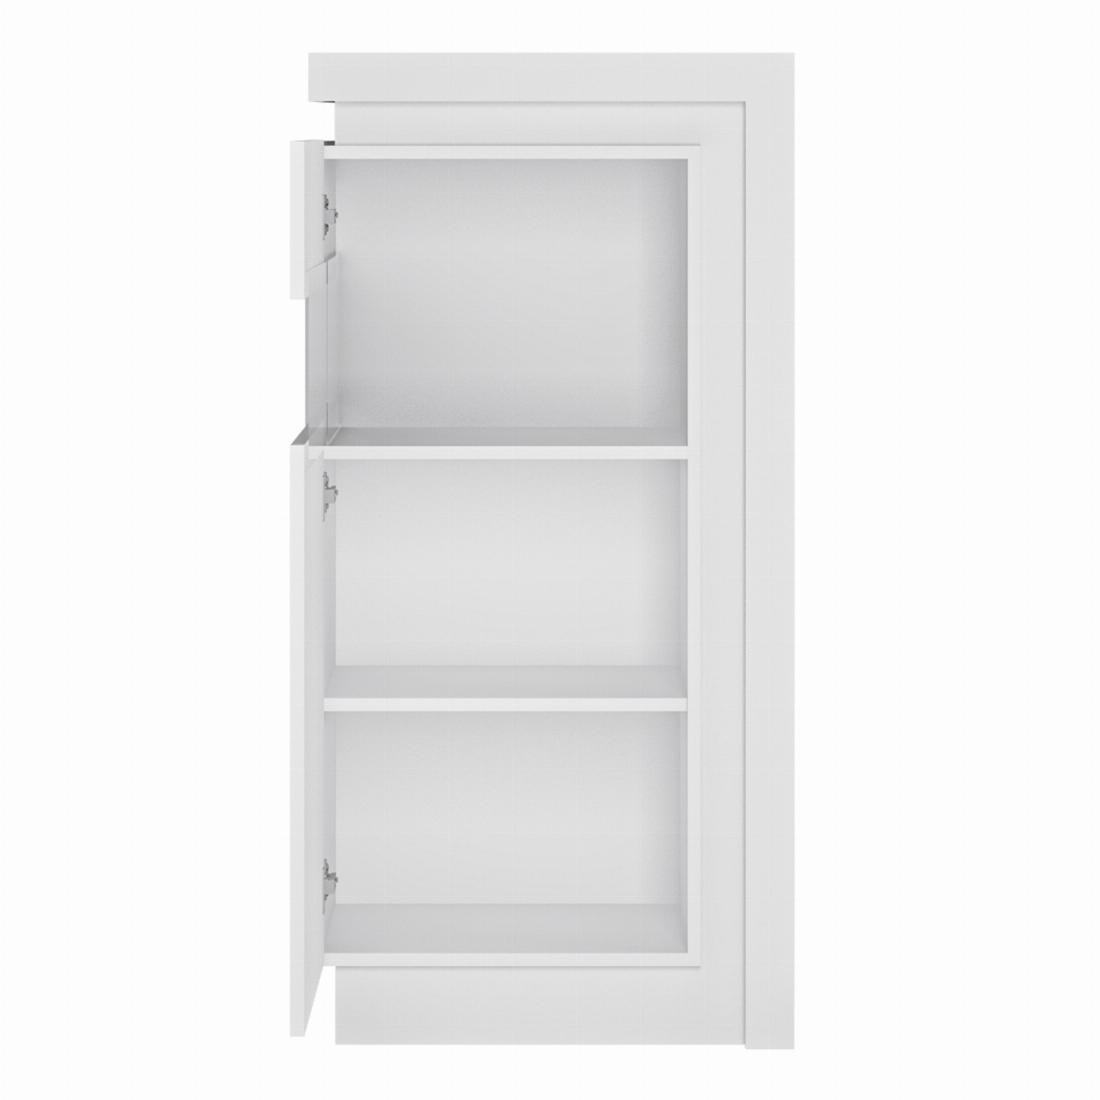 Lyon Narrow display cabinet (LHD) 123.6cm high (including LED lighting) in White and High Gloss